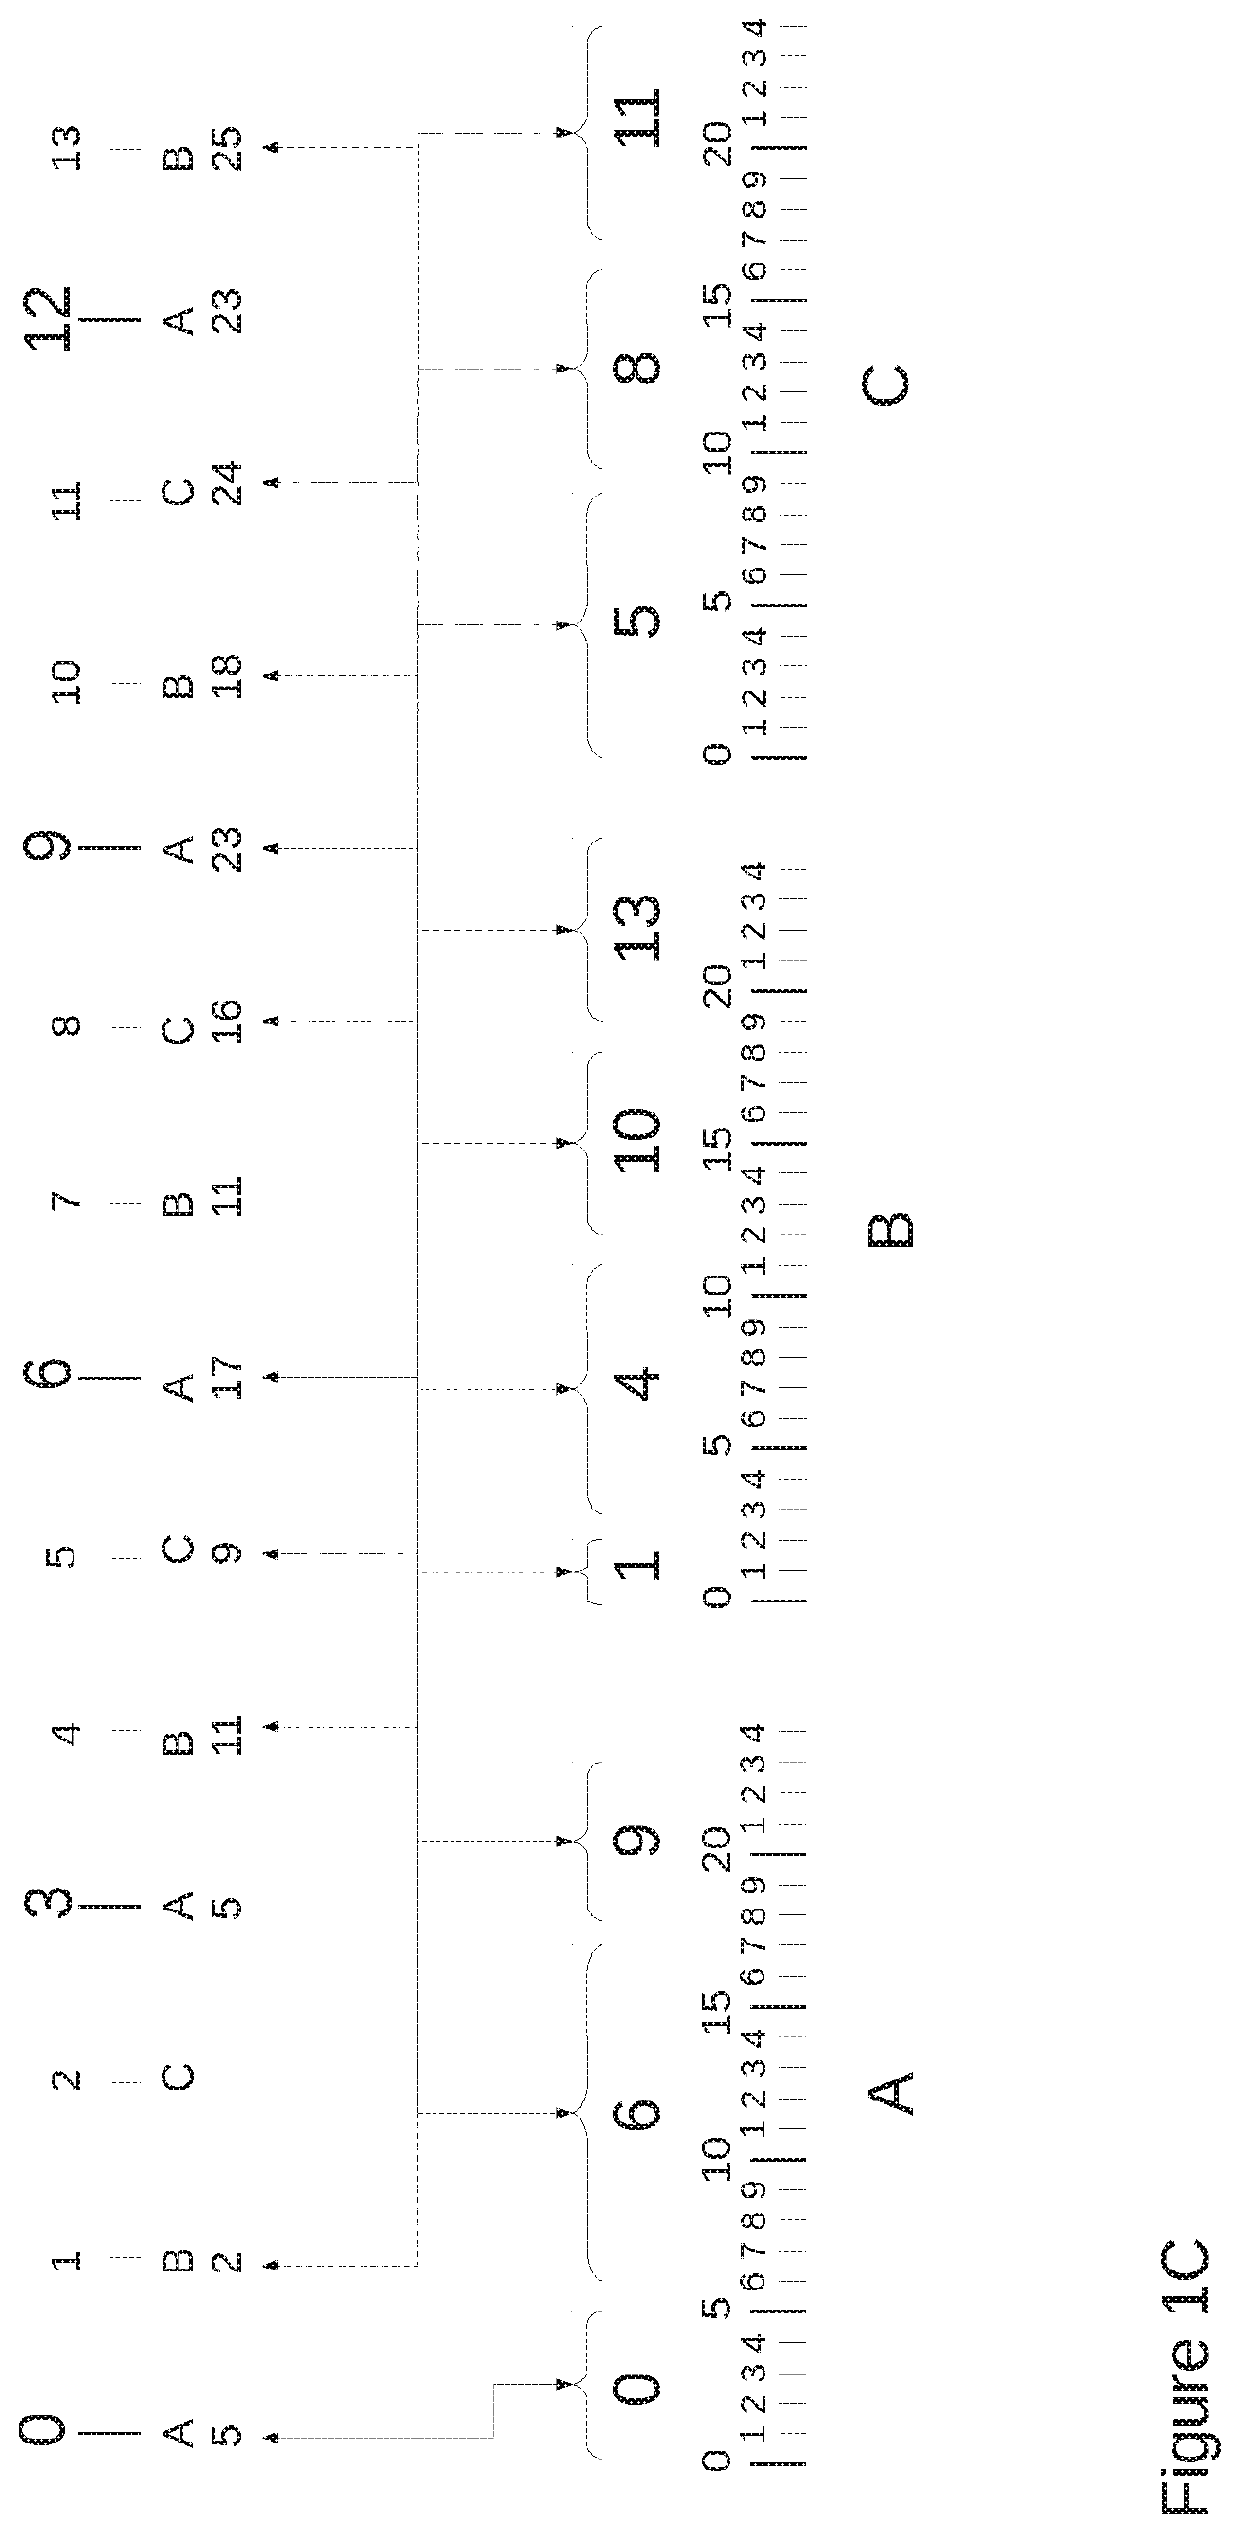 System and method for a distributed database